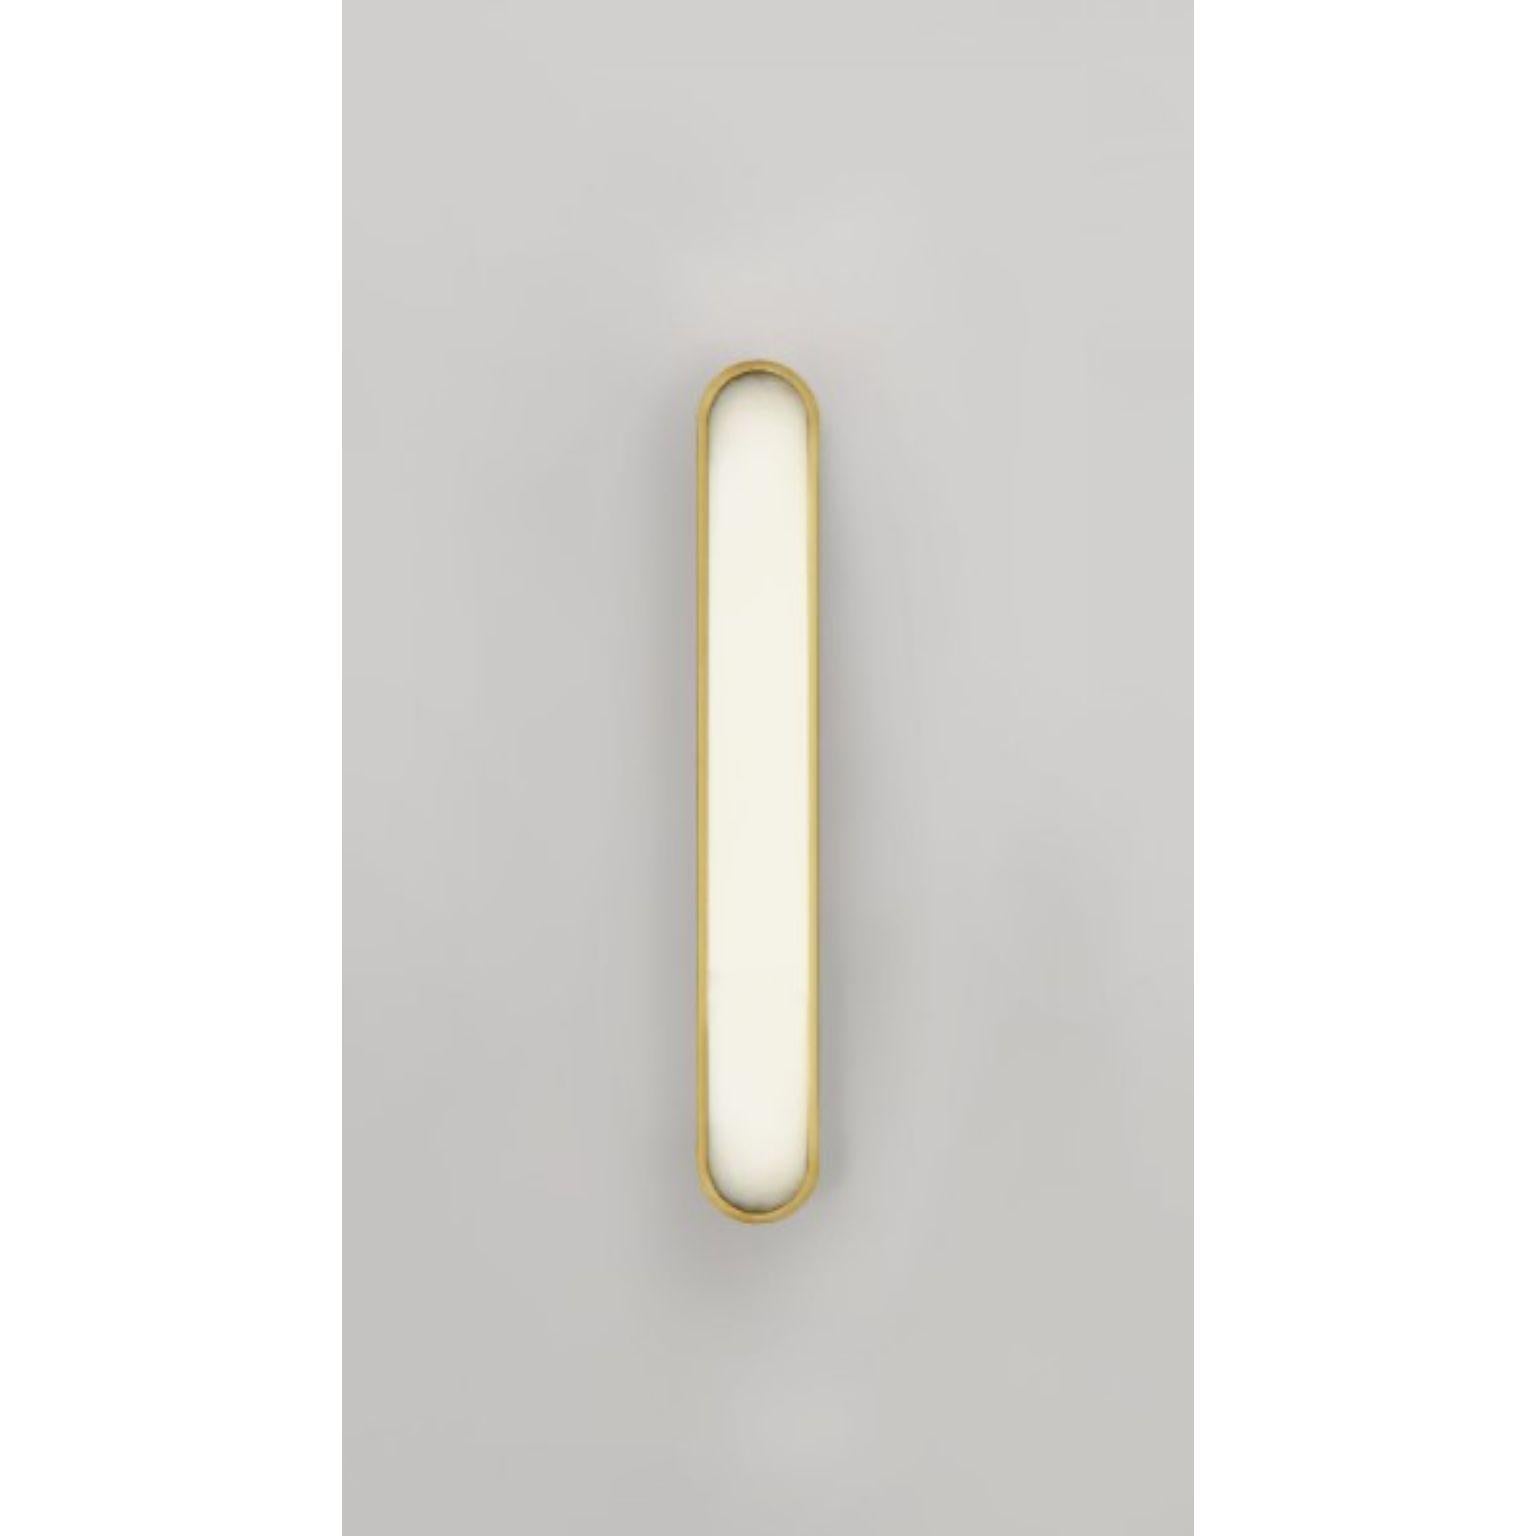 Post-Modern Set of 2 Capsule Golden Wall Lights by Square in Circle